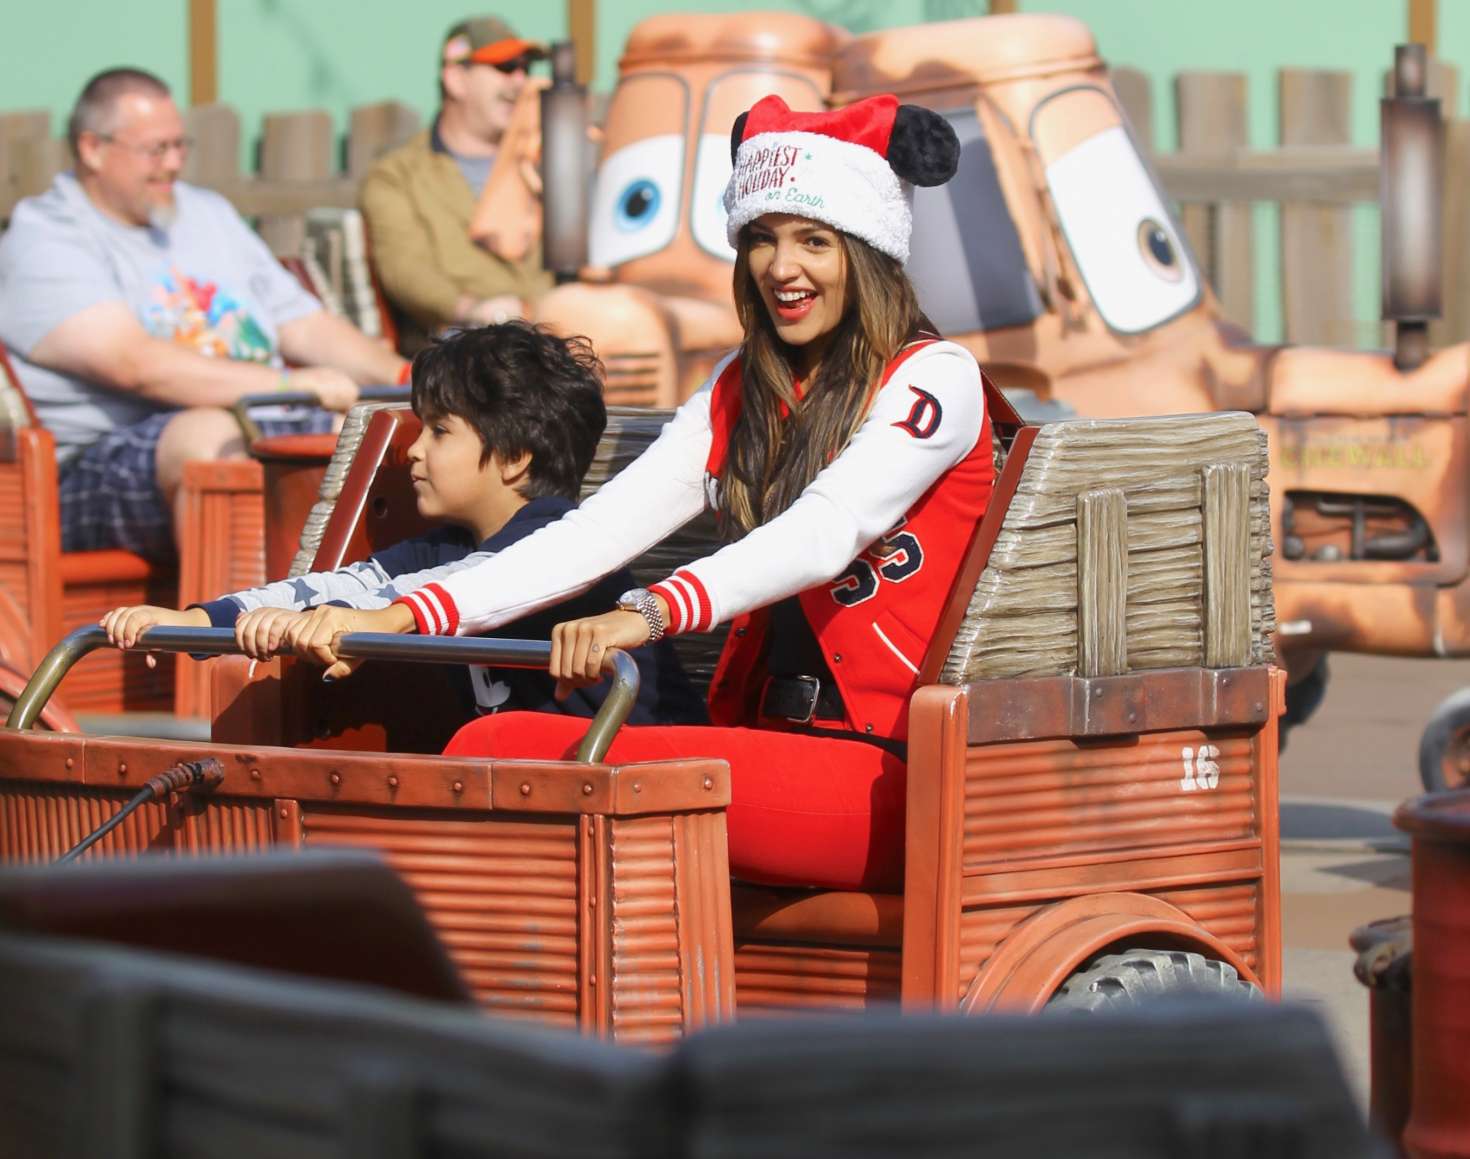 Eiza Gonzalez at Disneyland Park with her family in Los Angeles